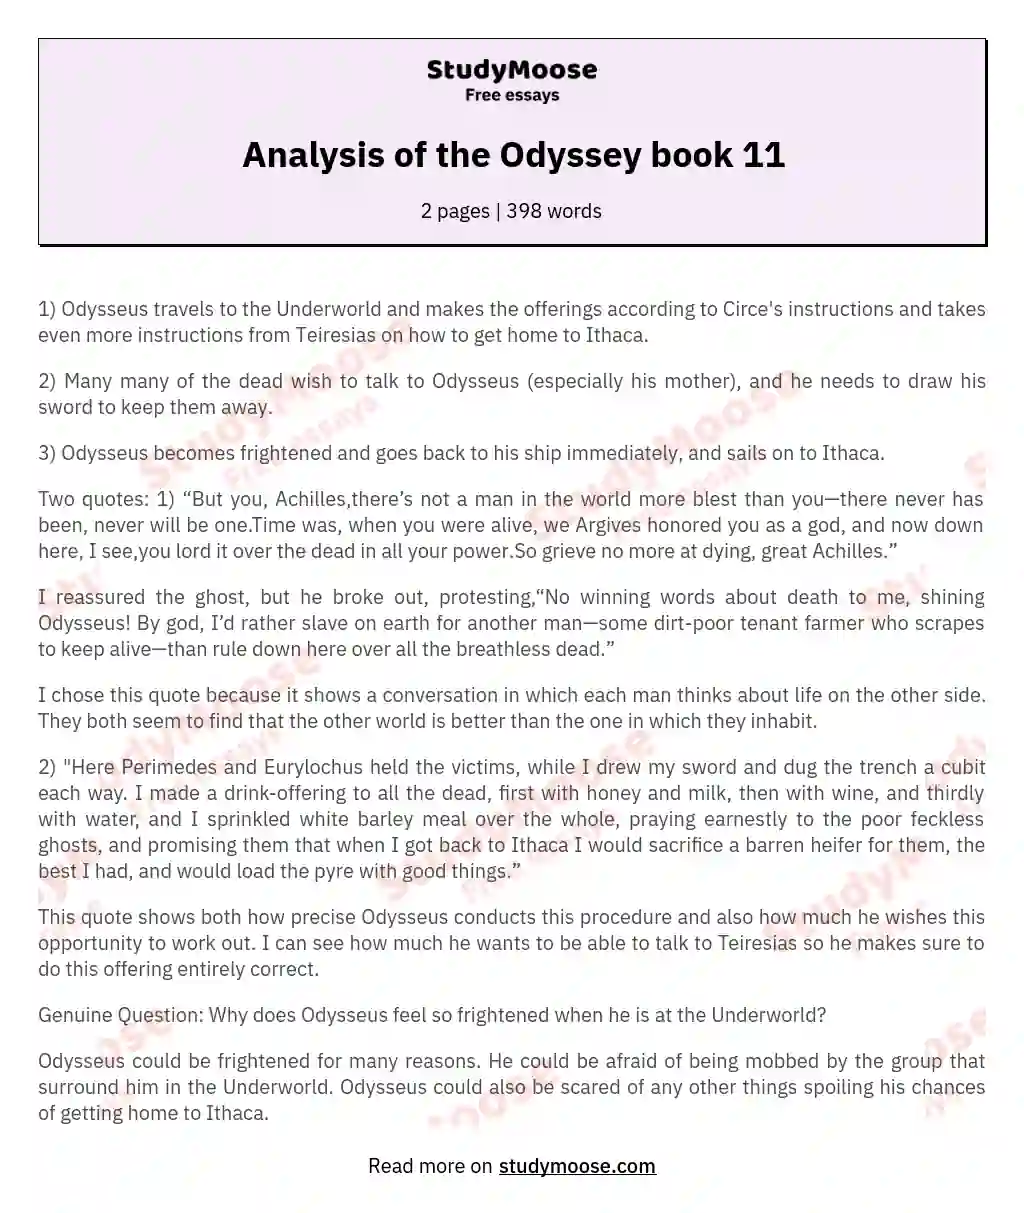 Analysis of the Odyssey book 11 essay